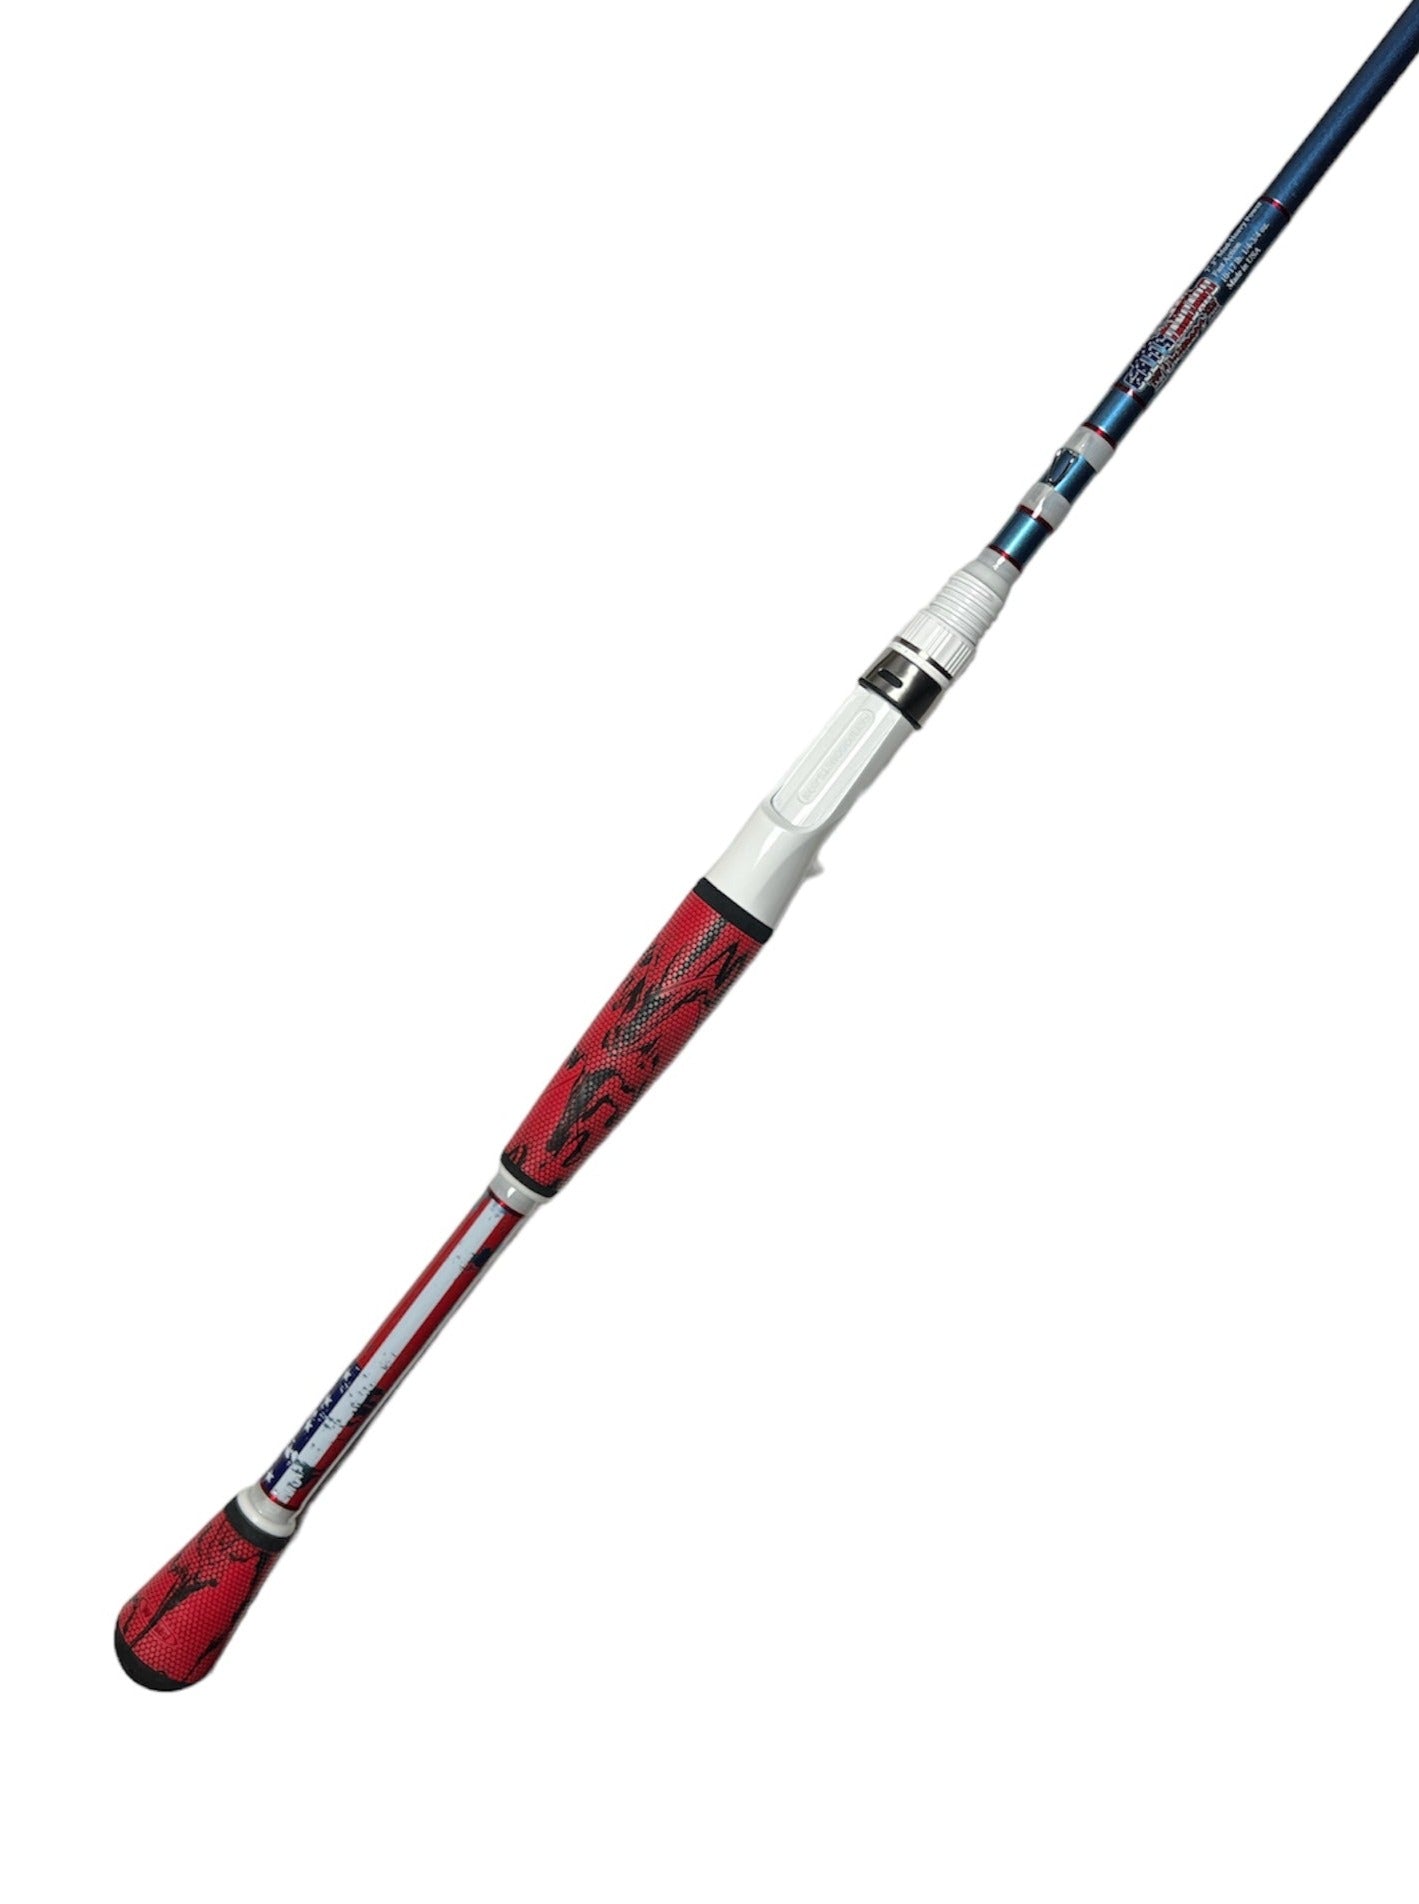 7'3 USA Med-Heavy Power Fast Action Pre-Built Casting Rod – Gold